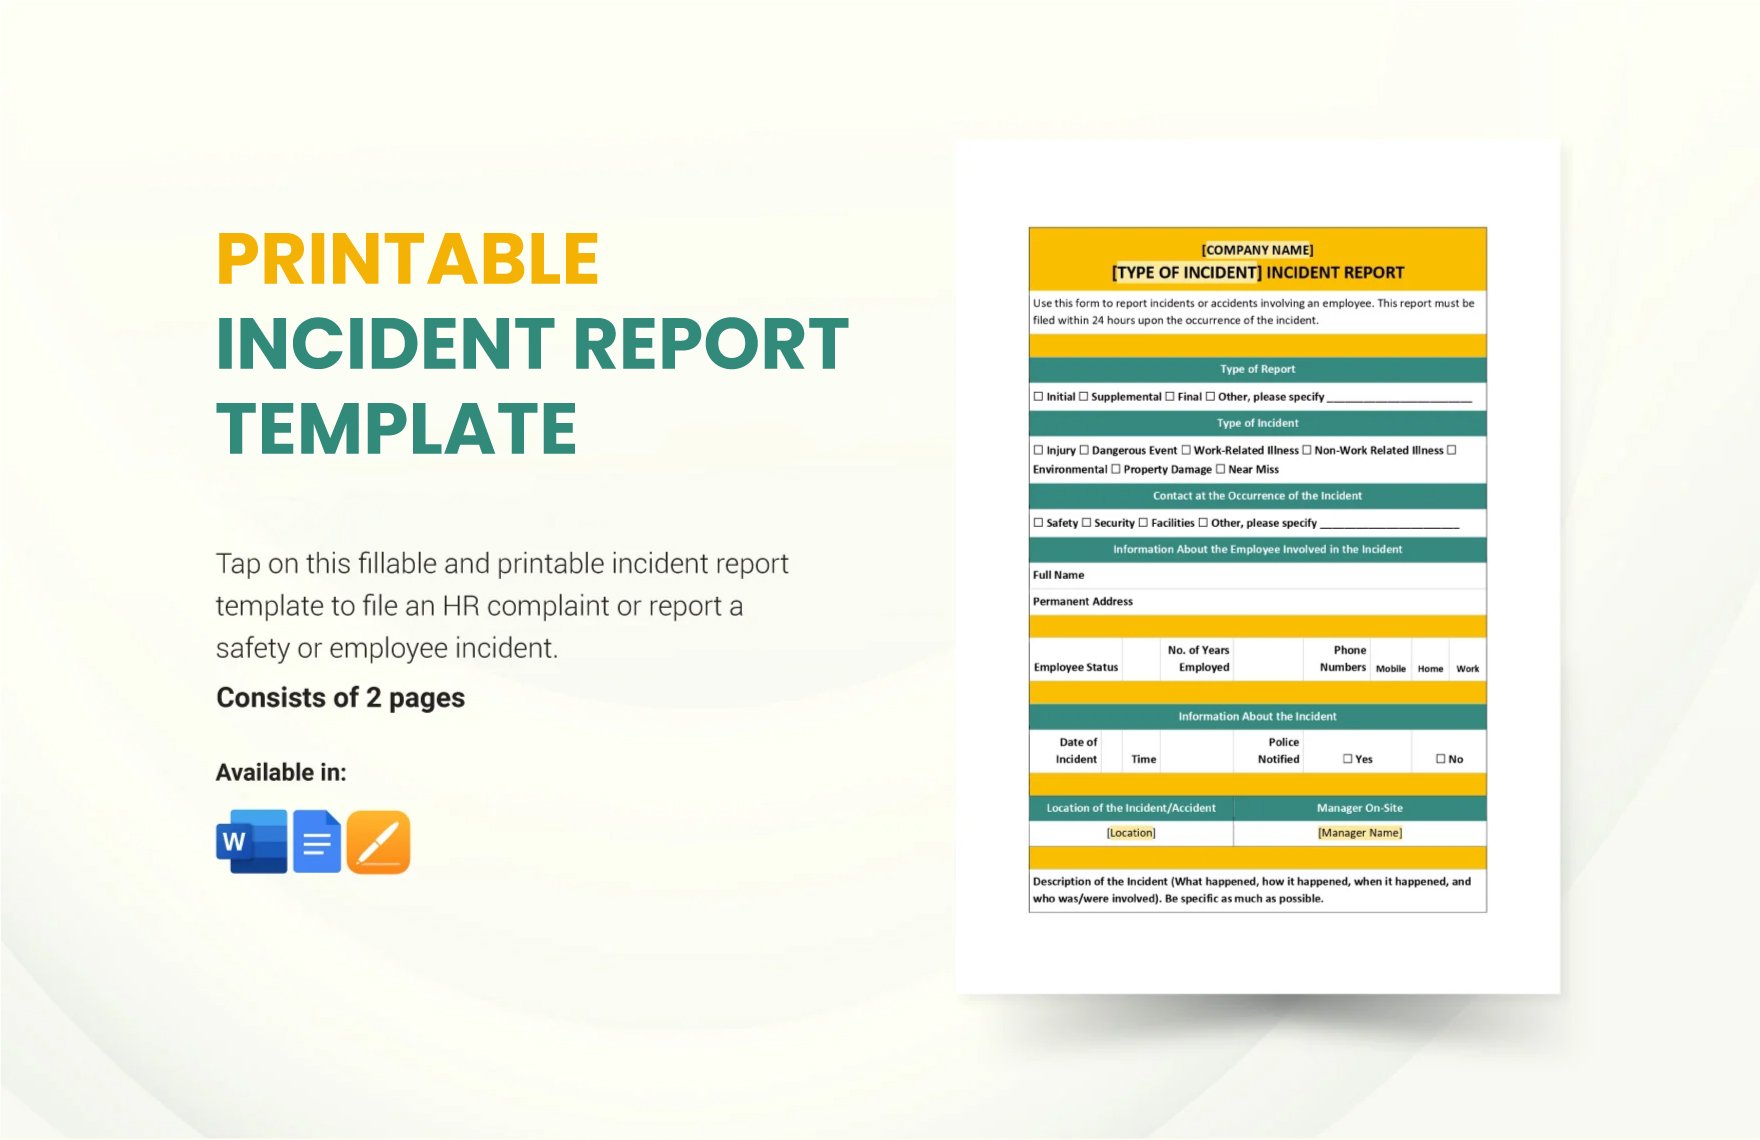 Free Printable Incident Report Template in Word, Google Docs, Apple Pages